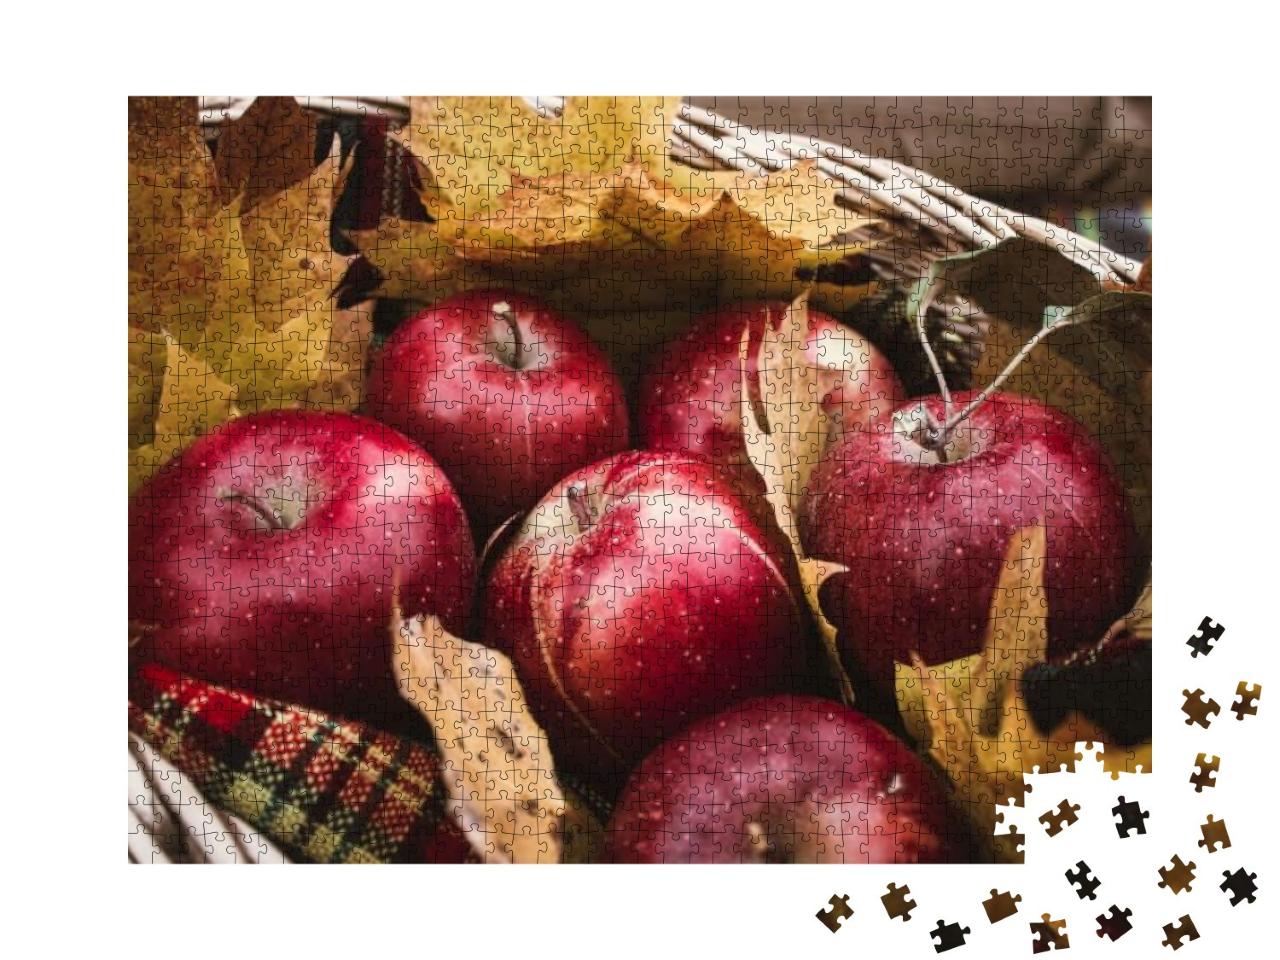 Harvest of Red Apples in a Basket & in Autumn Leaves... Jigsaw Puzzle with 1000 pieces